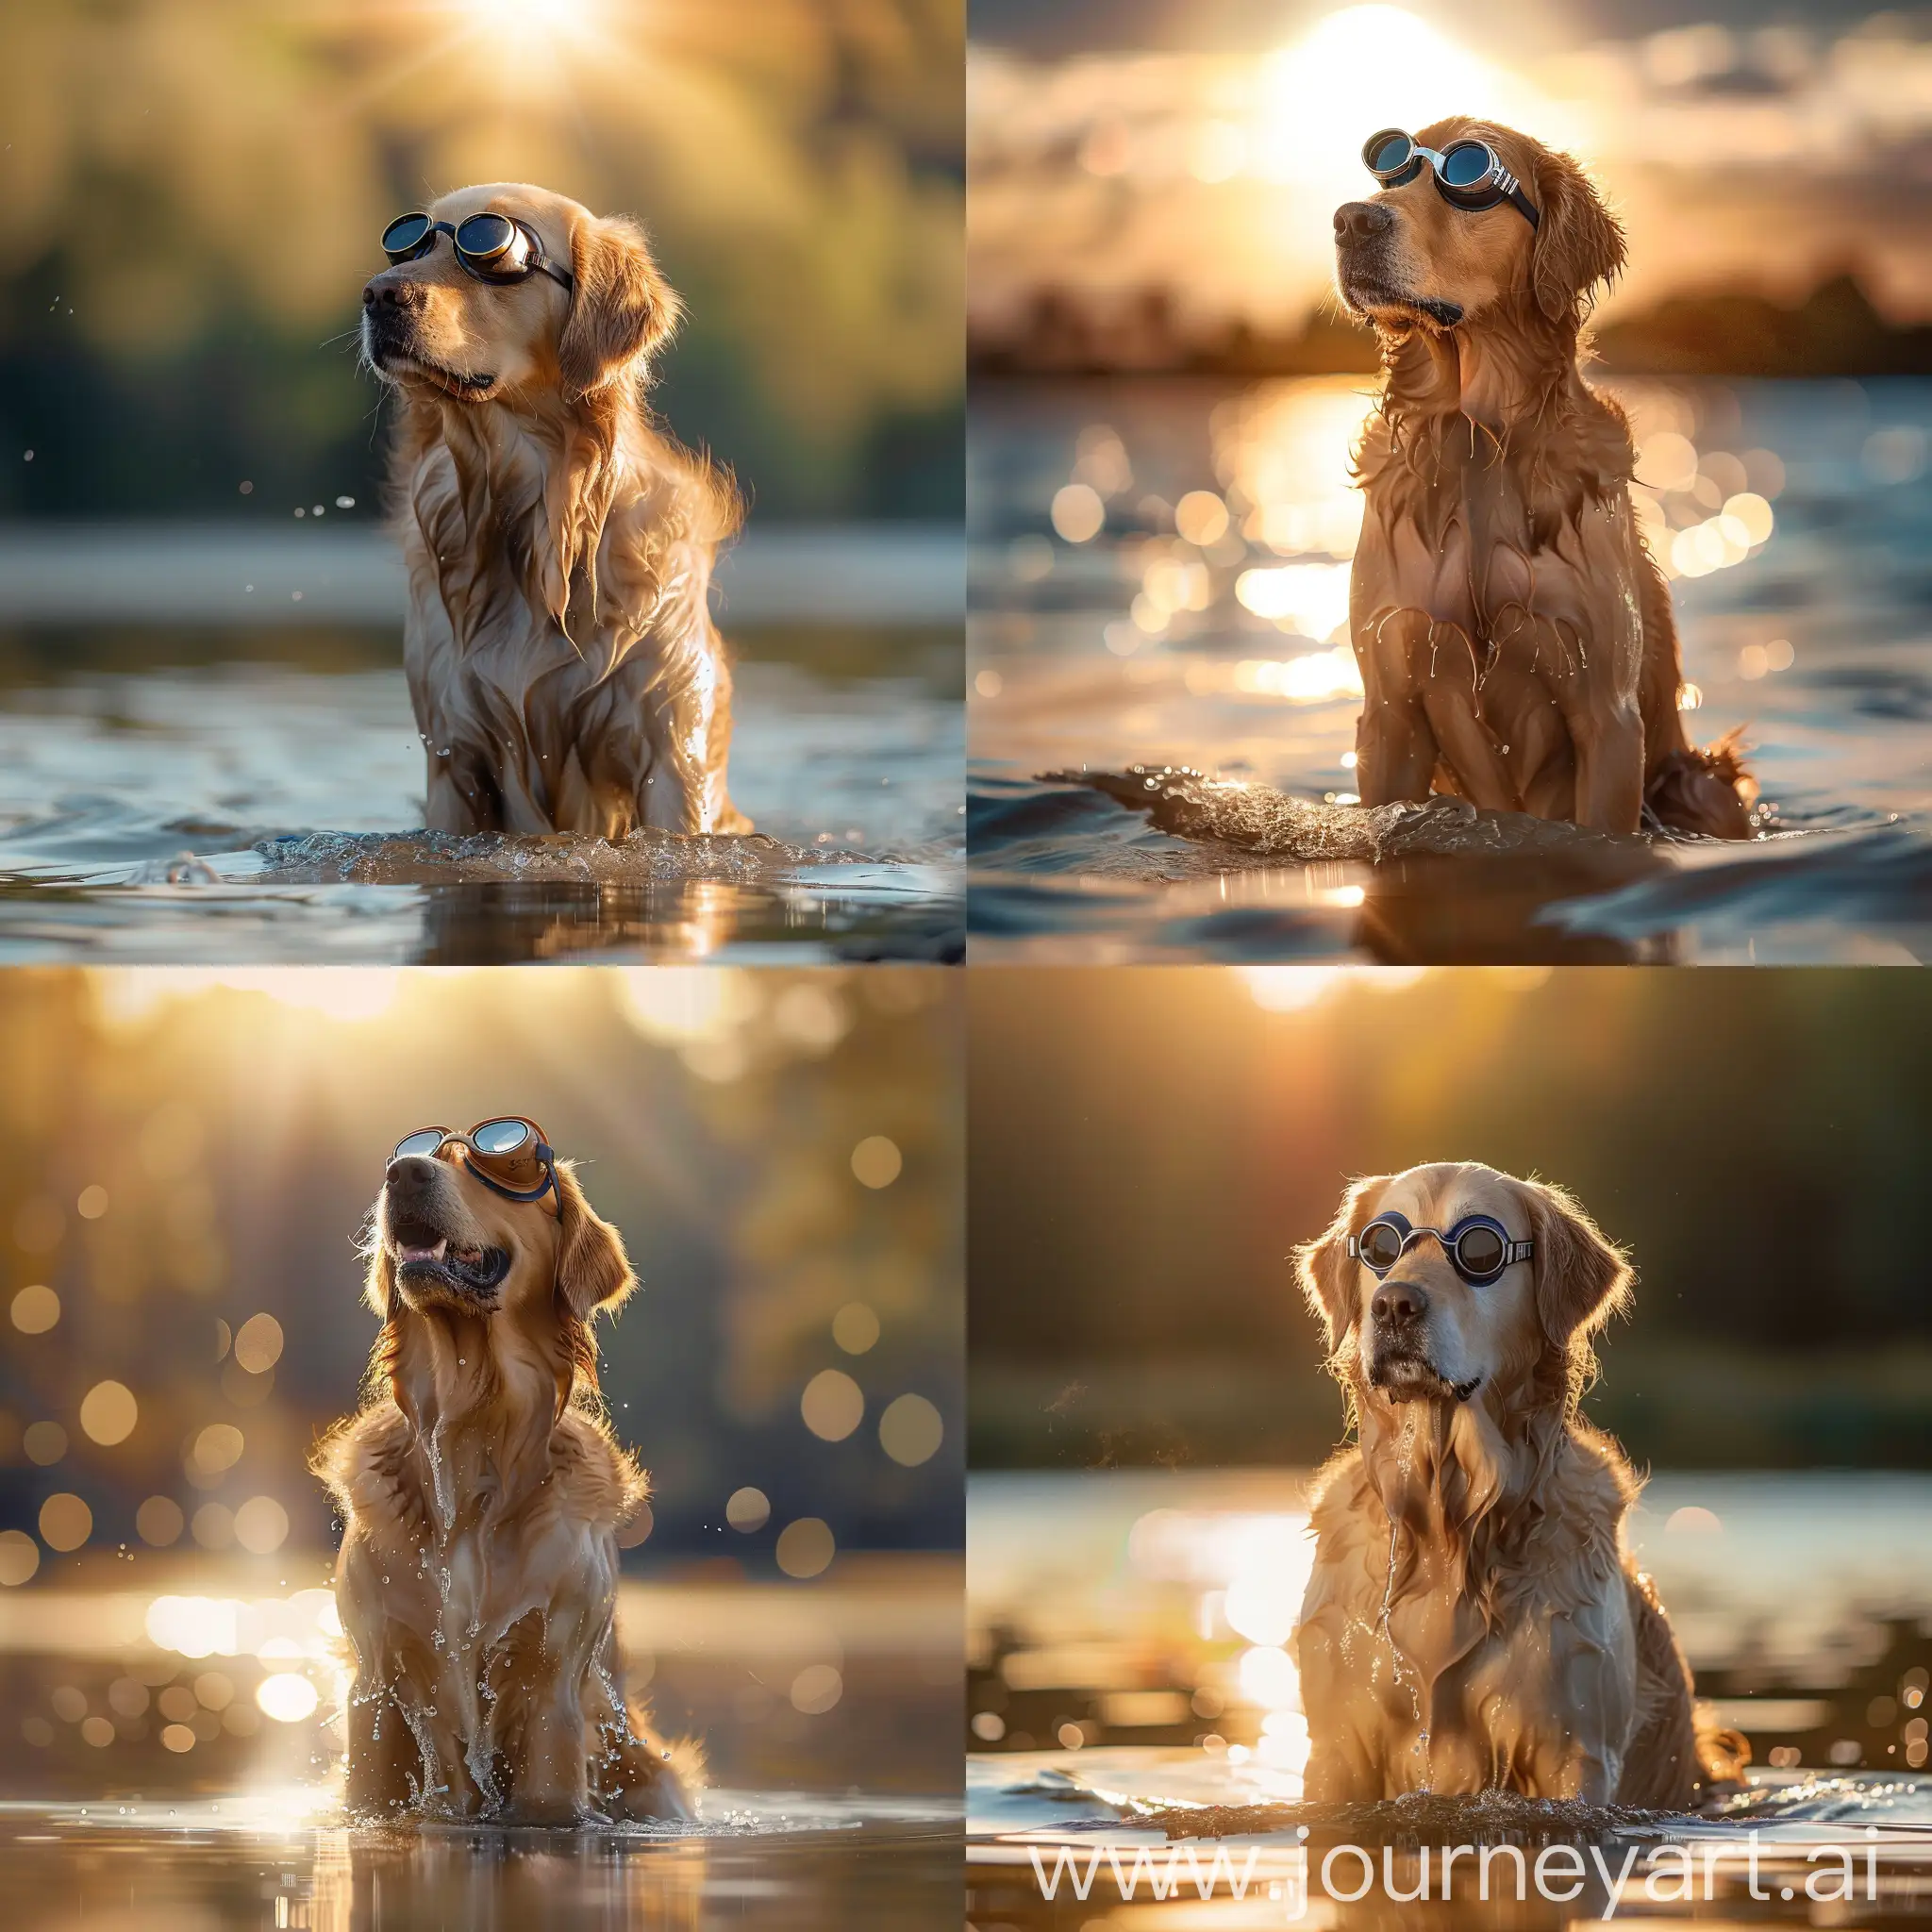 Create a realistic image of a golden retriever sitting in the water wearing swimming googles. Use a Nikon D850 DSLR camera with a 200mm lens at F 1.2 aperture setting to isolate the subject and add a blurred backdrop of the sunligh.  Use positive lighting with sunlight and shadows to create a dynamic image.